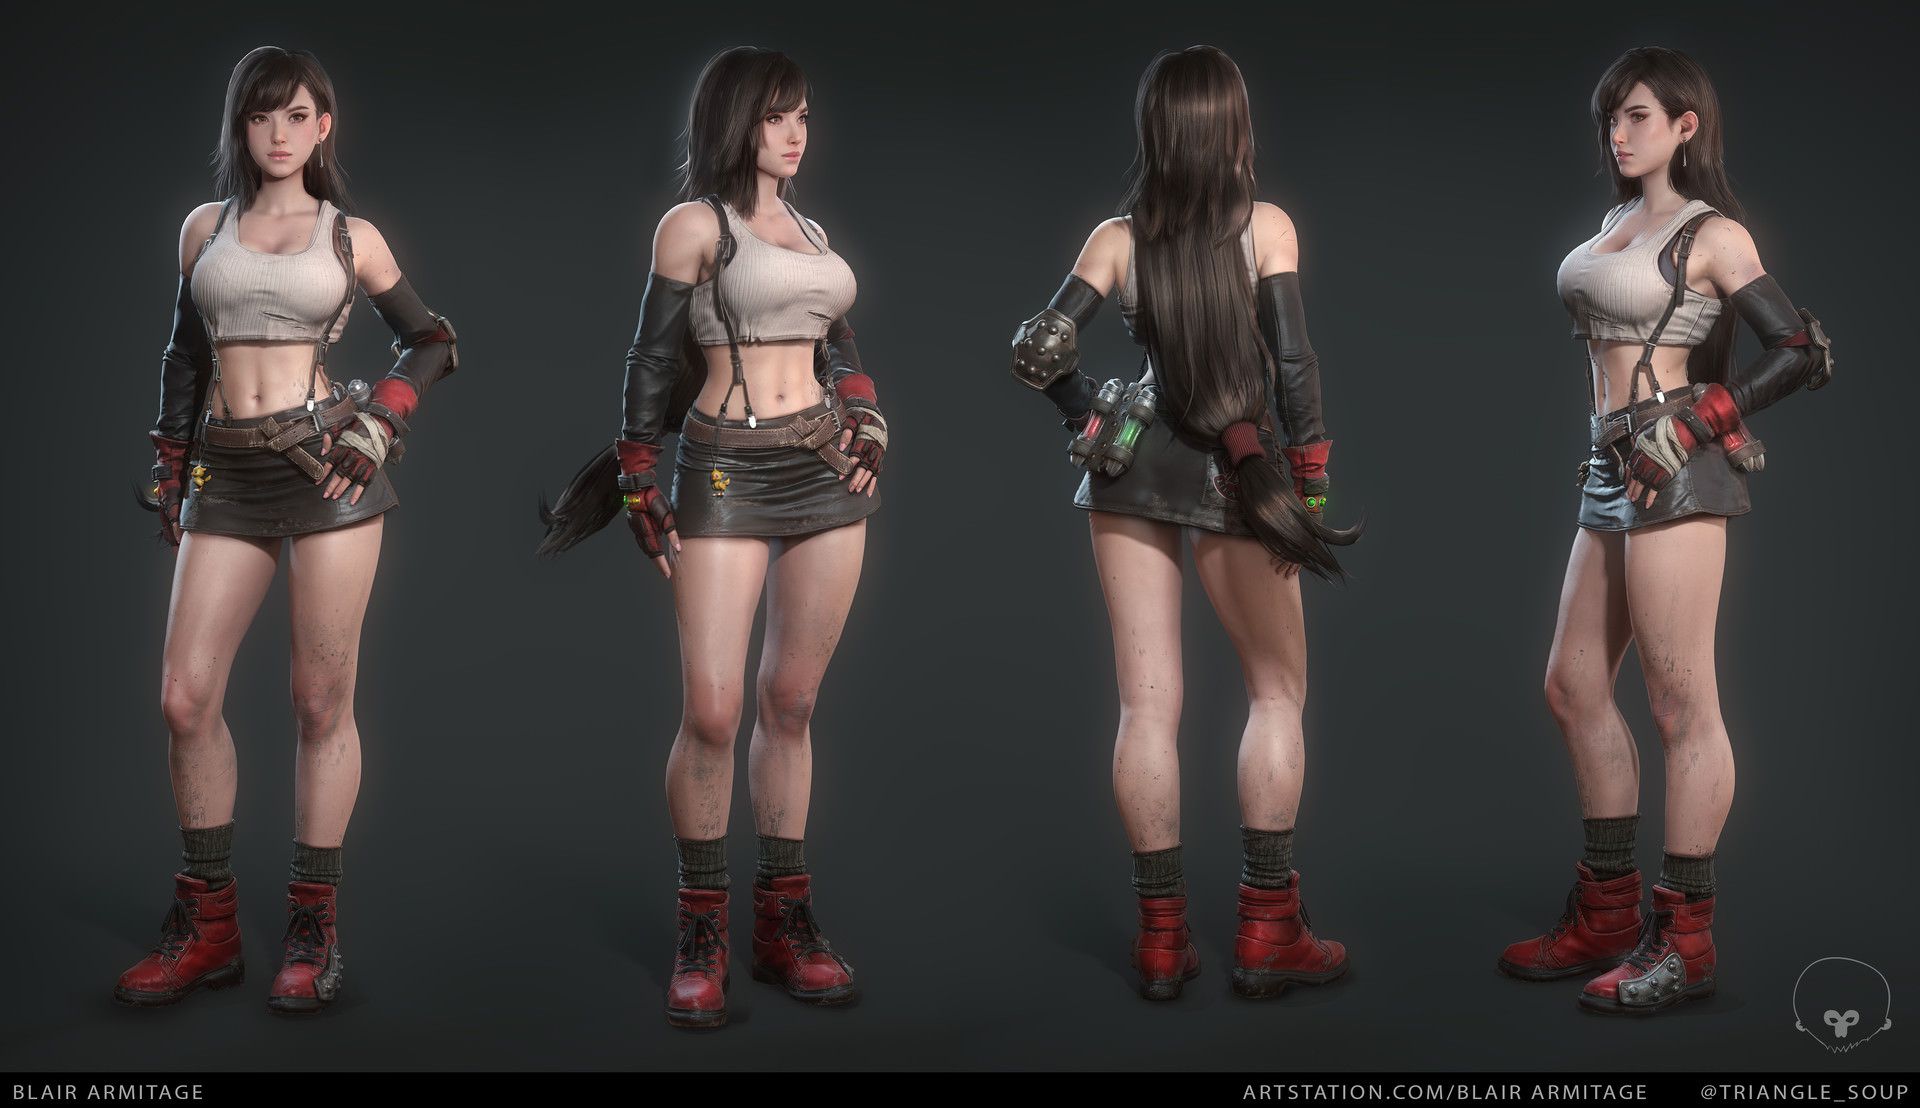 Crimson is the first person who portrayed Ff7's Tifa erotic, isn't he? 13